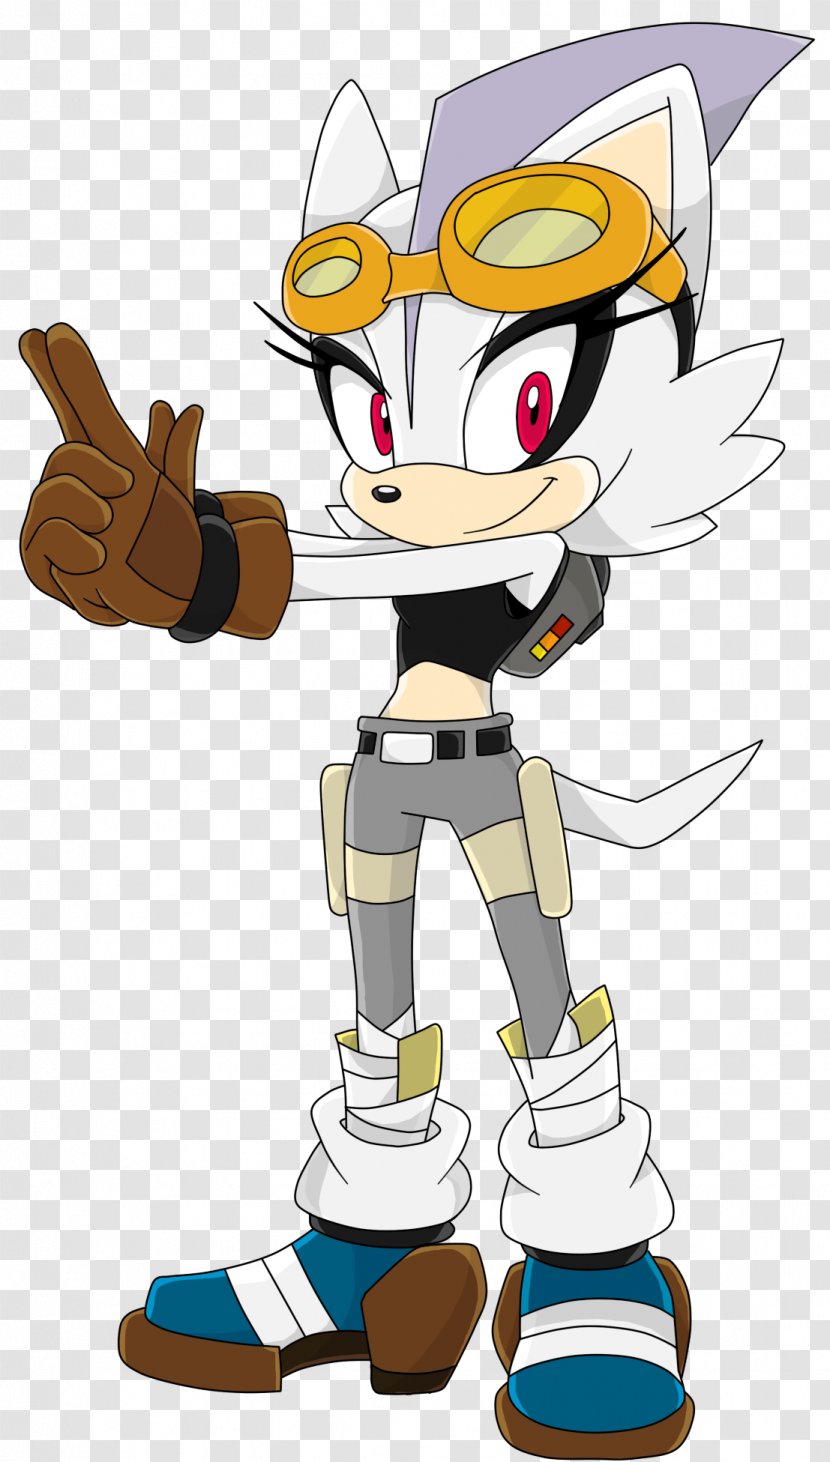 Sonic The Hedgehog Knuckles Echidna And Black Knight Colors Mania - Fictional Character Transparent PNG